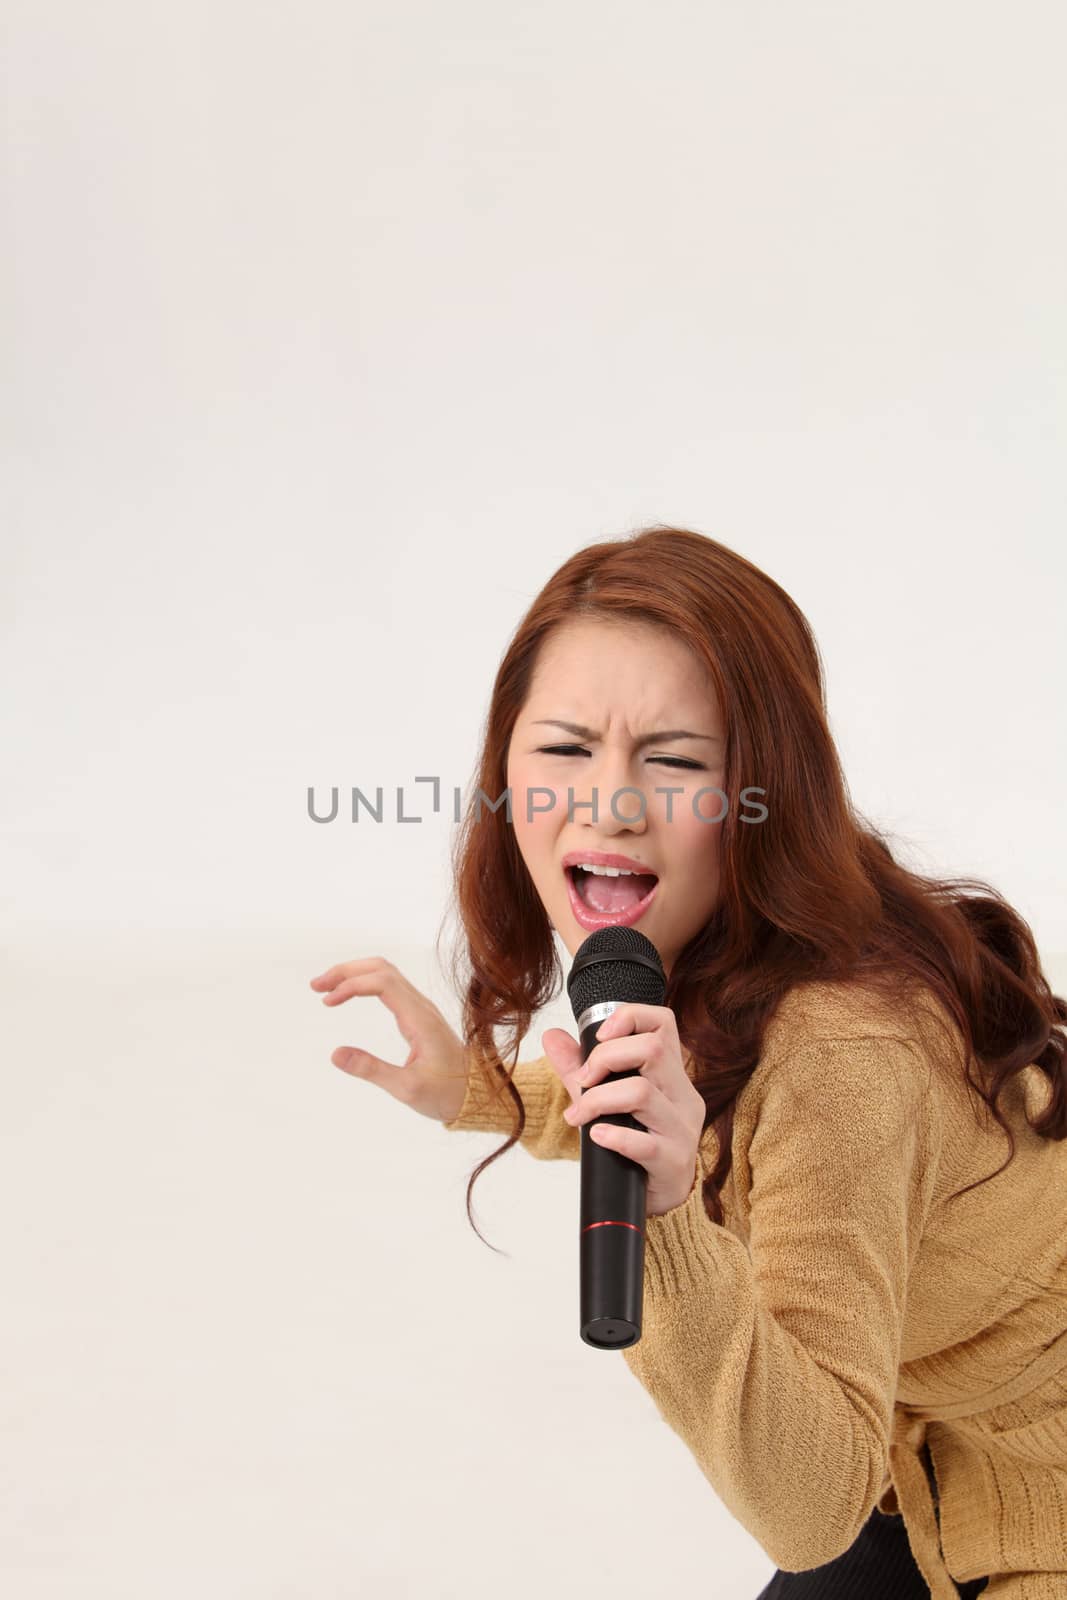 Woman singing, holding wireless microphone